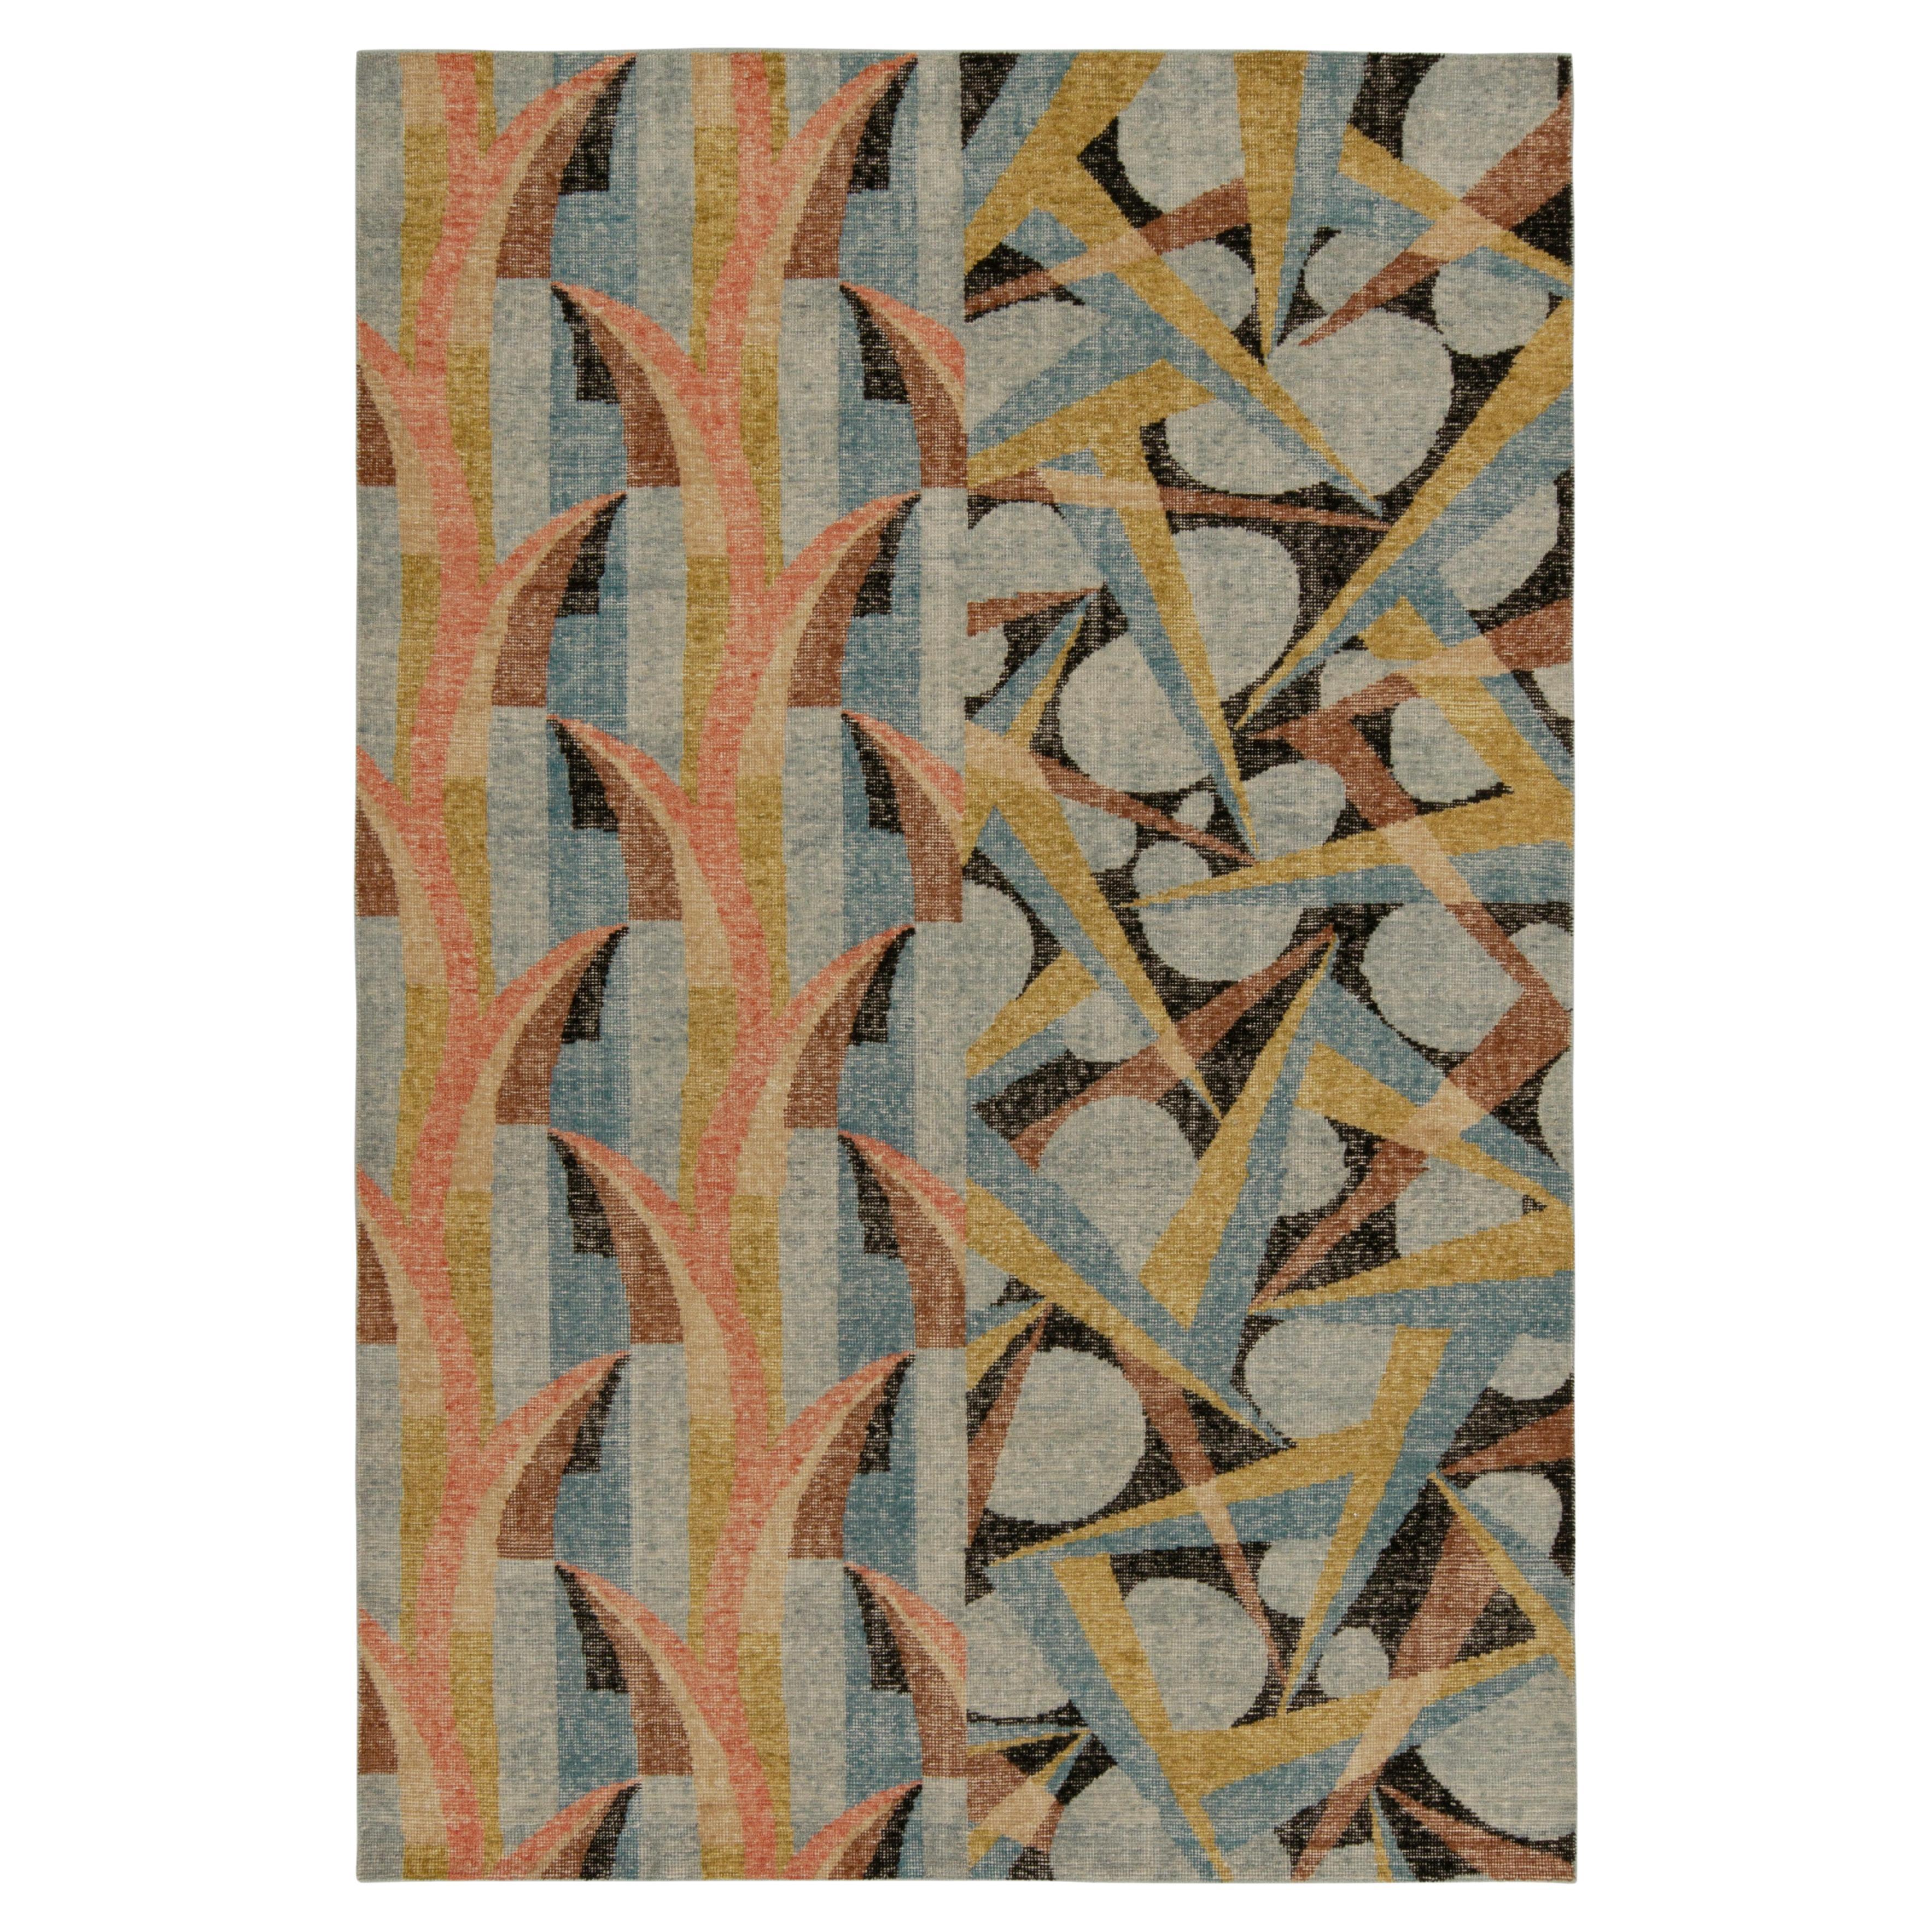 Rug & Kilim’s Distressed Deco Style Rug in Blue & Beige-Brown Geometric Patterns For Sale